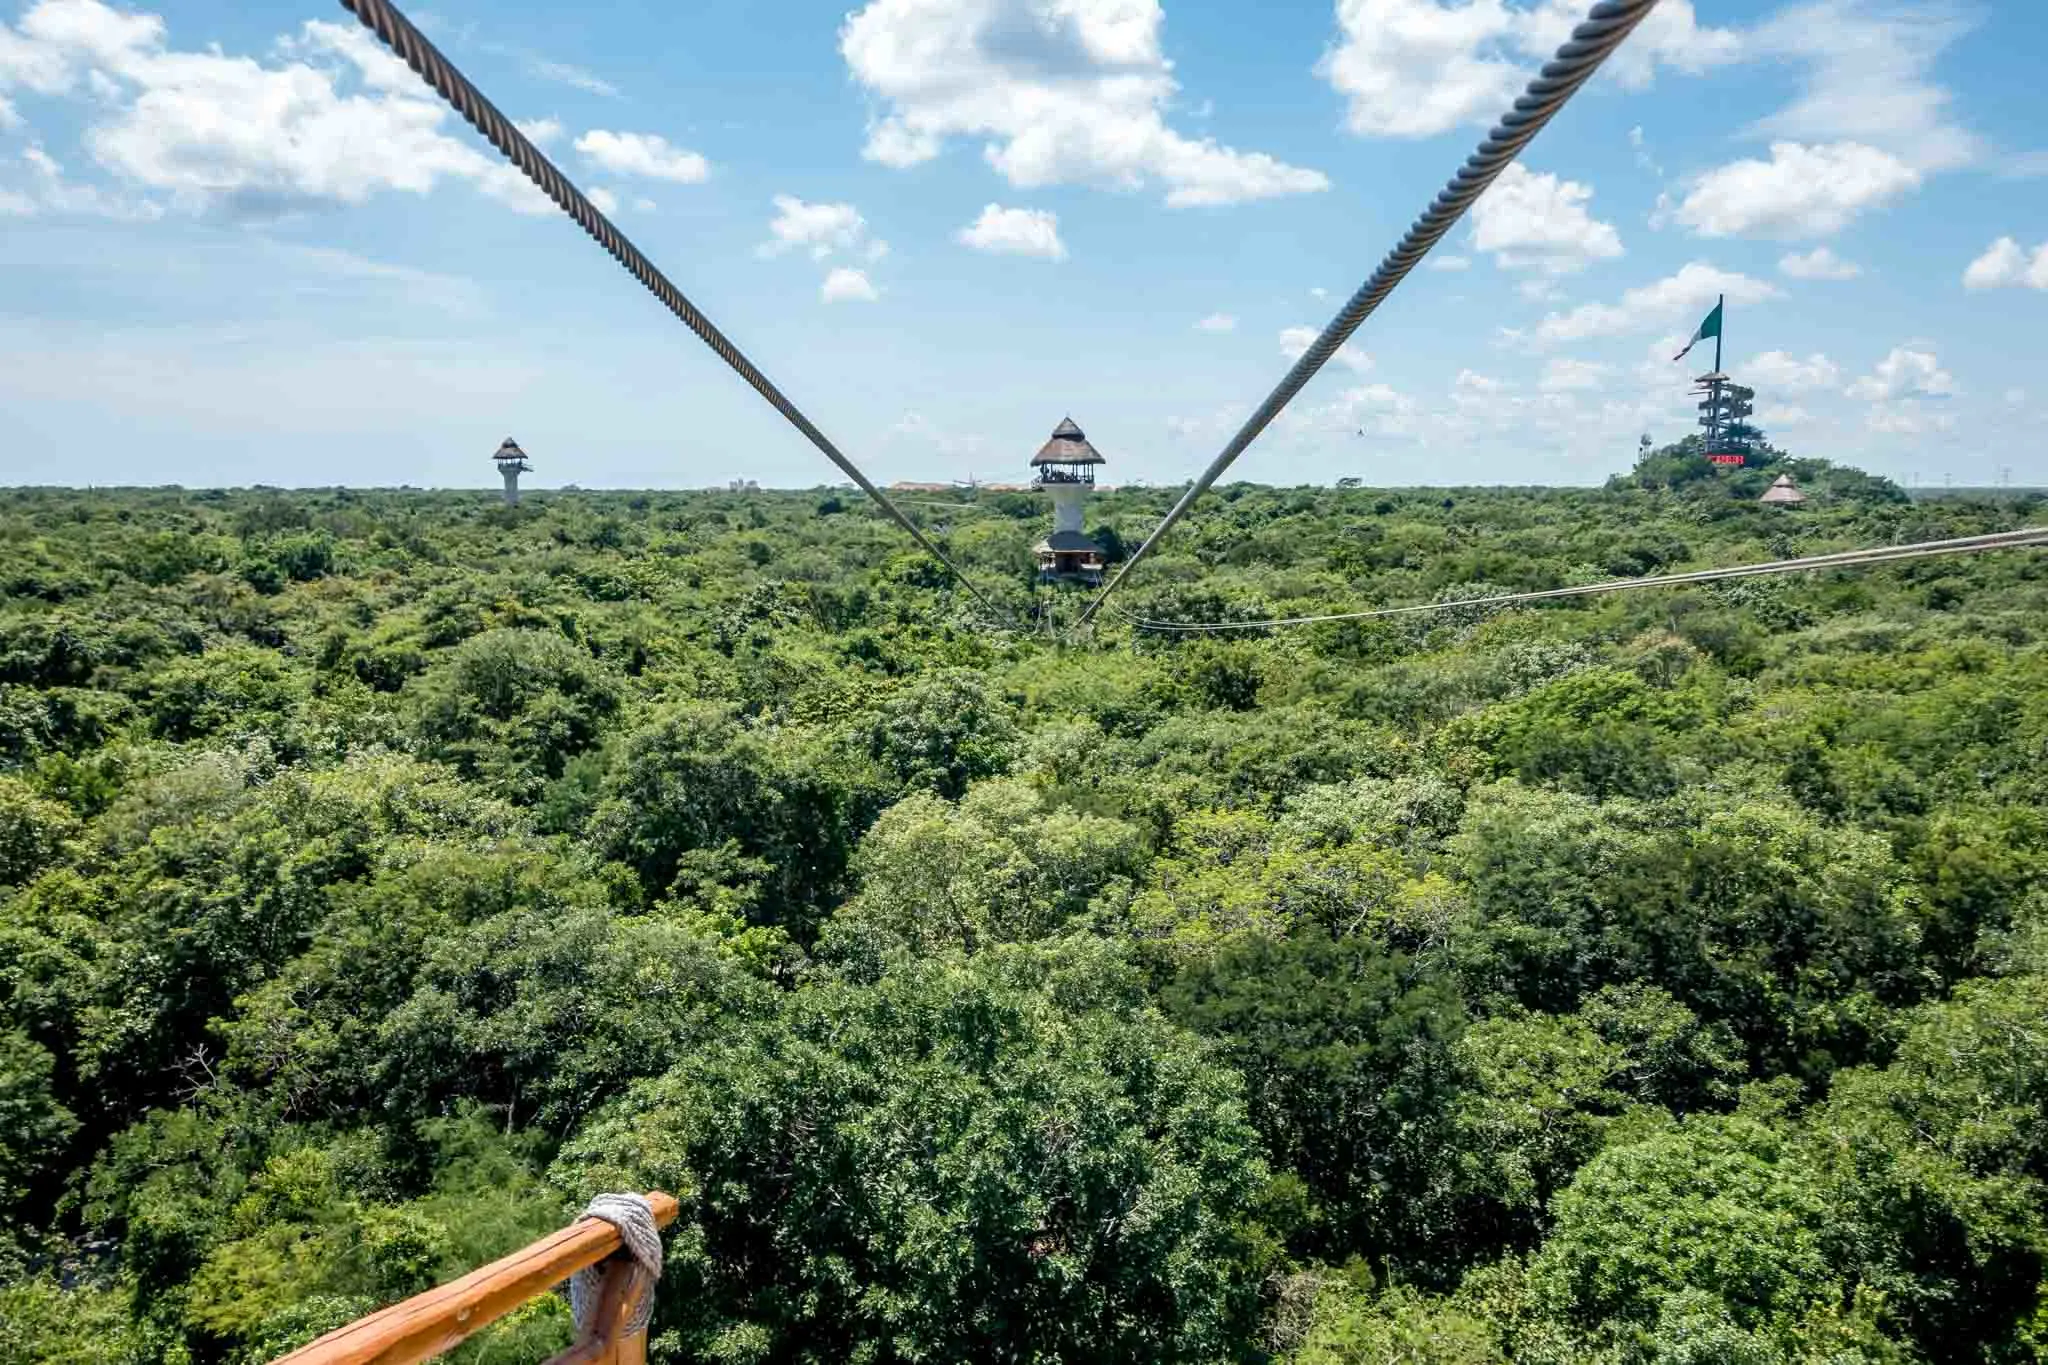 Zip lines above a tree canopy